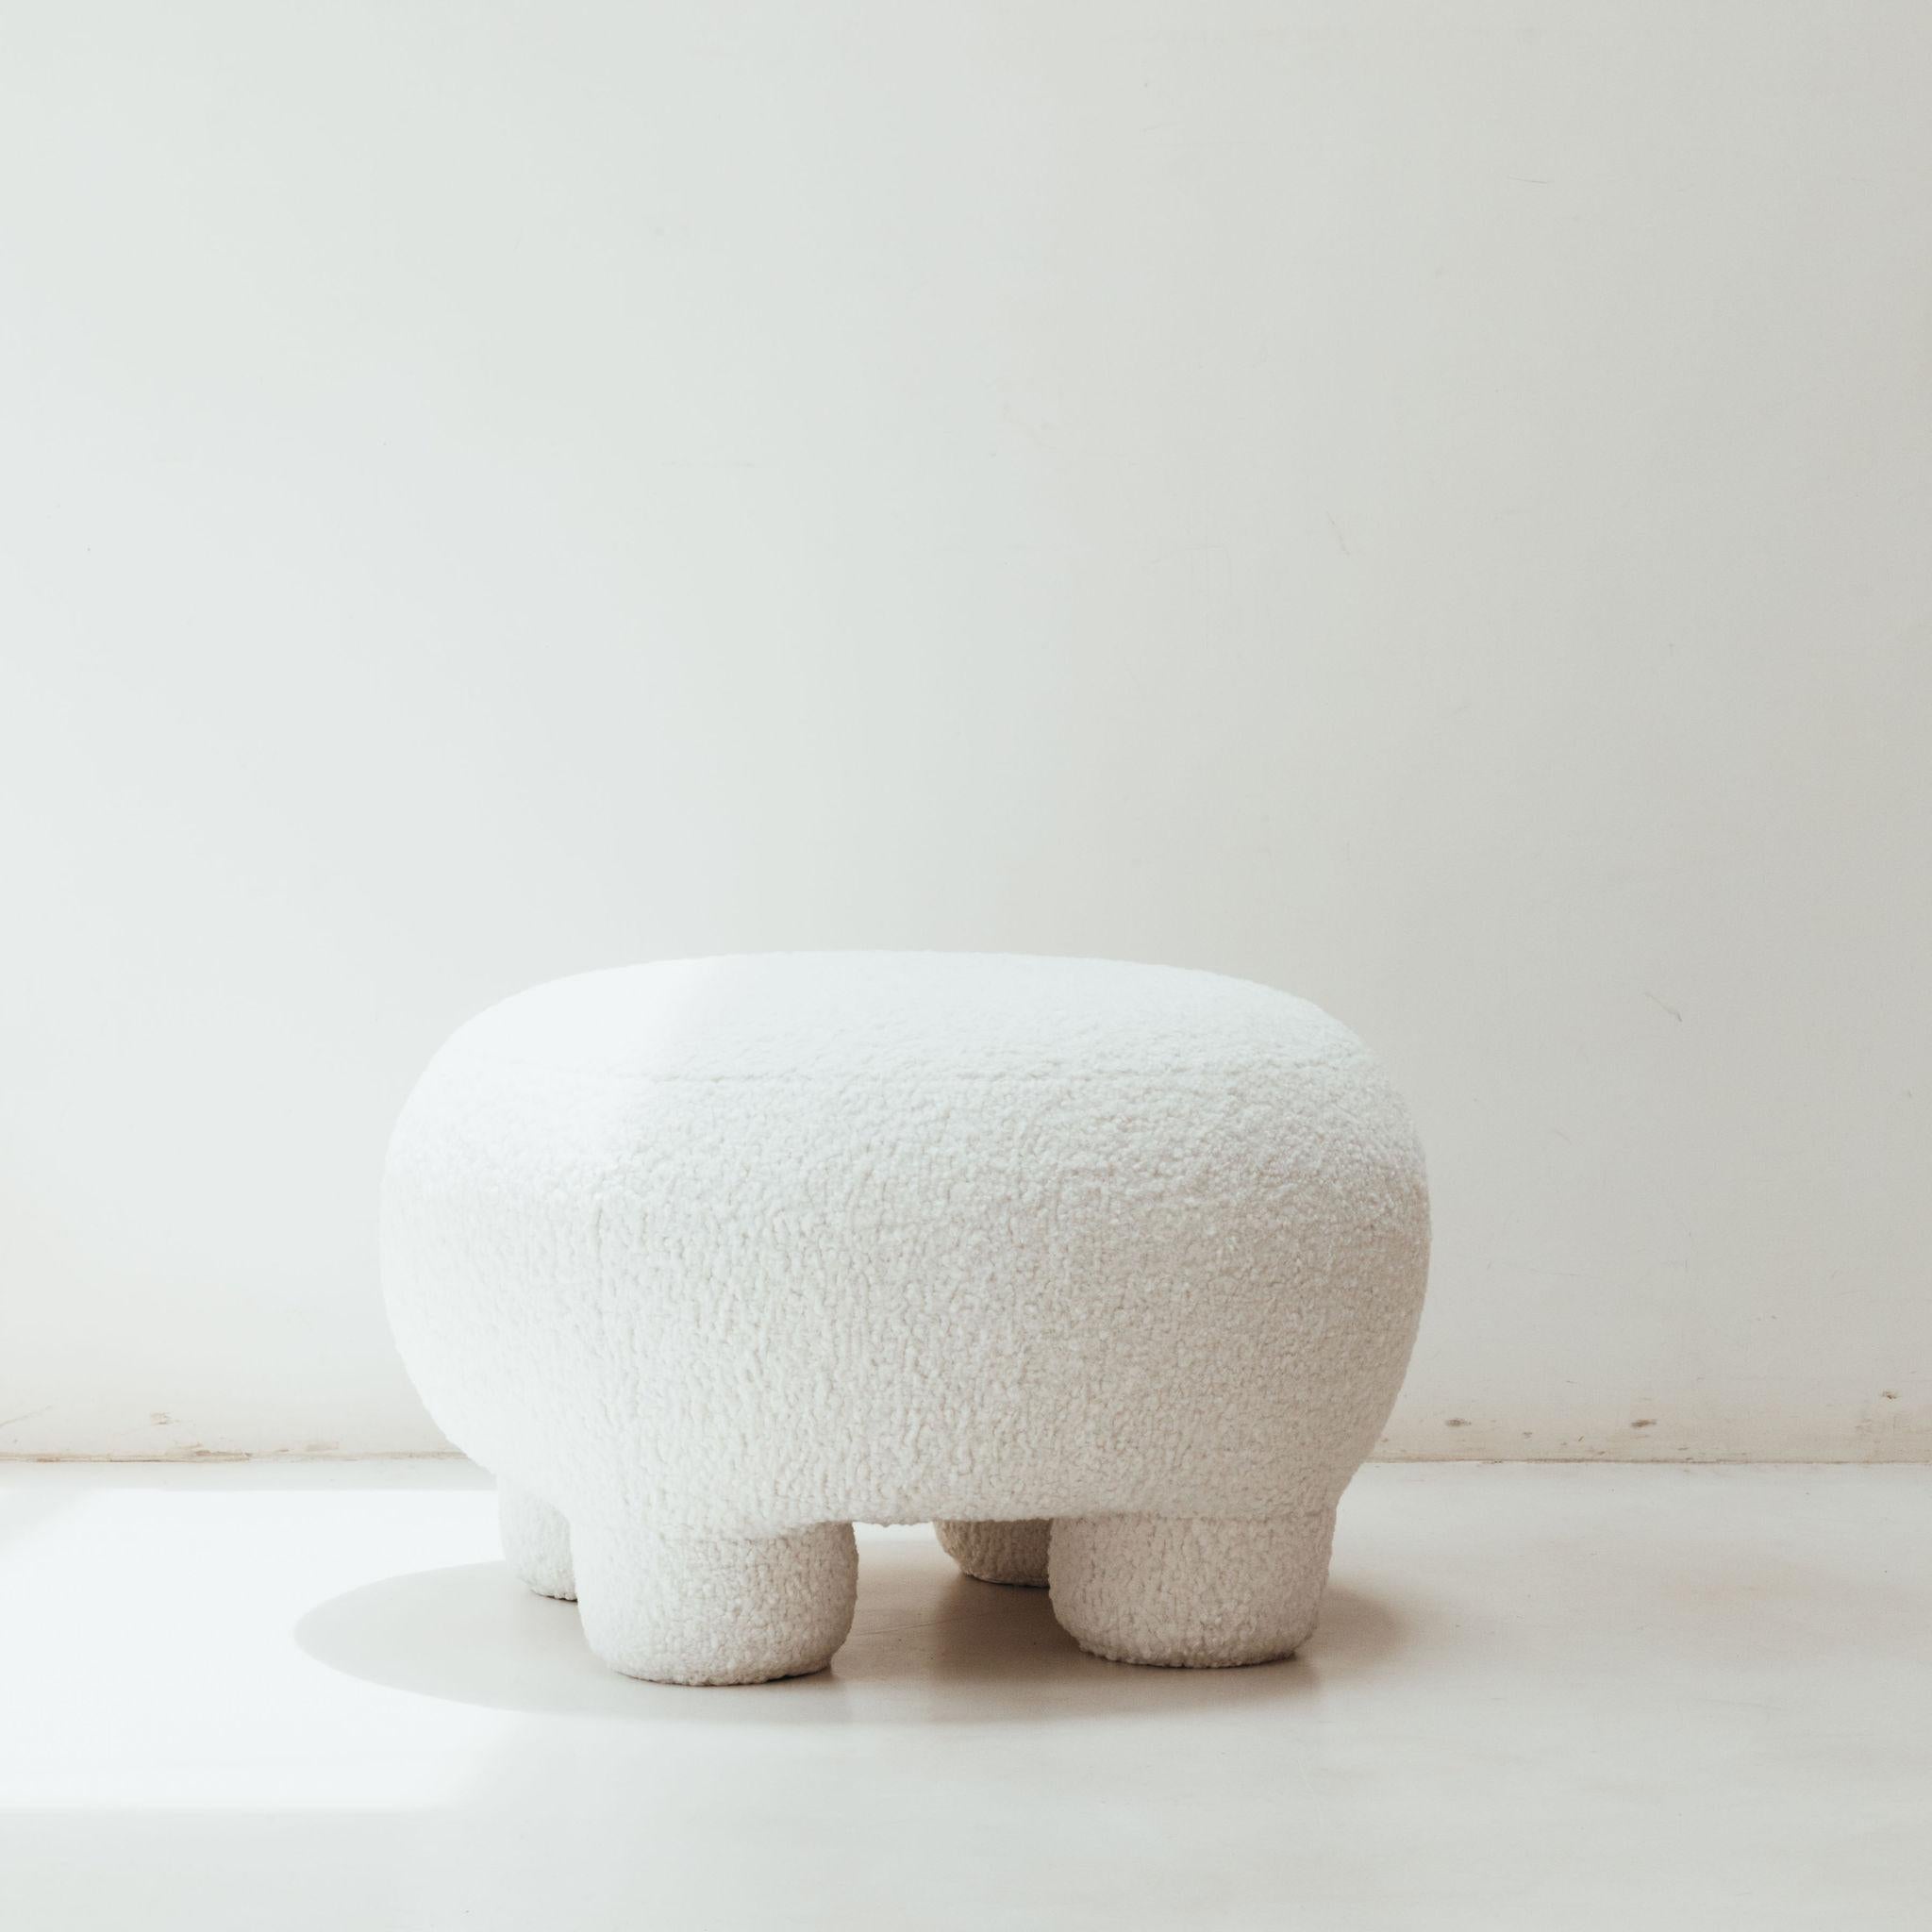 Folk Pouf by David Del Valle
Dimensions: D 70 x W 70 x H 40 cm.
Materials: French bouclet fabric.

DAVID VALLE
We are a place, a space, a woven chair, the dreams of a craftsman, the pride of a worker, we are a way of thinking, we are moldable and we